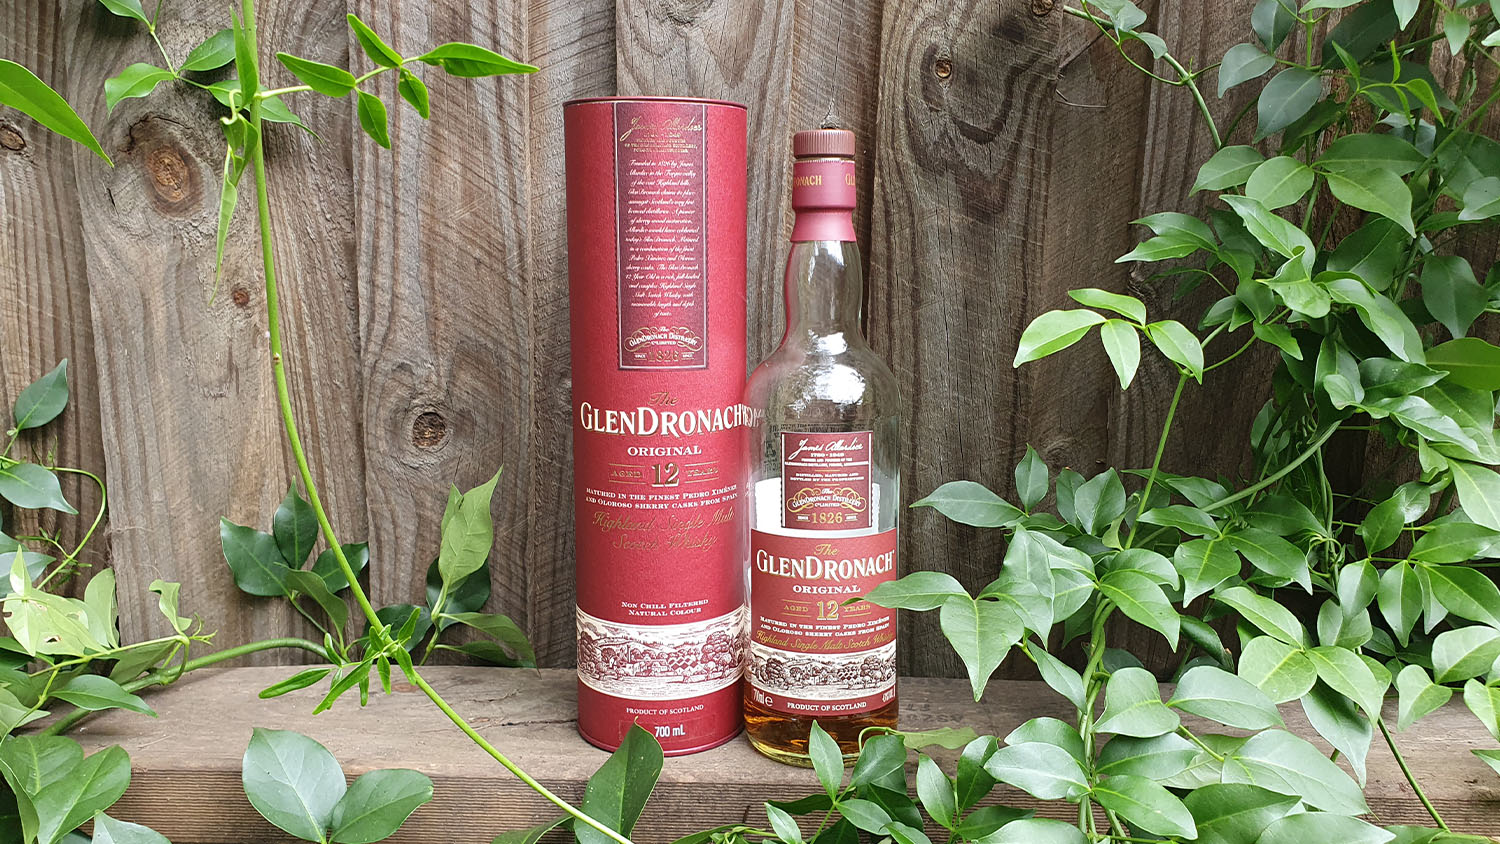 Glendronach 12 Year Old Whisky Review